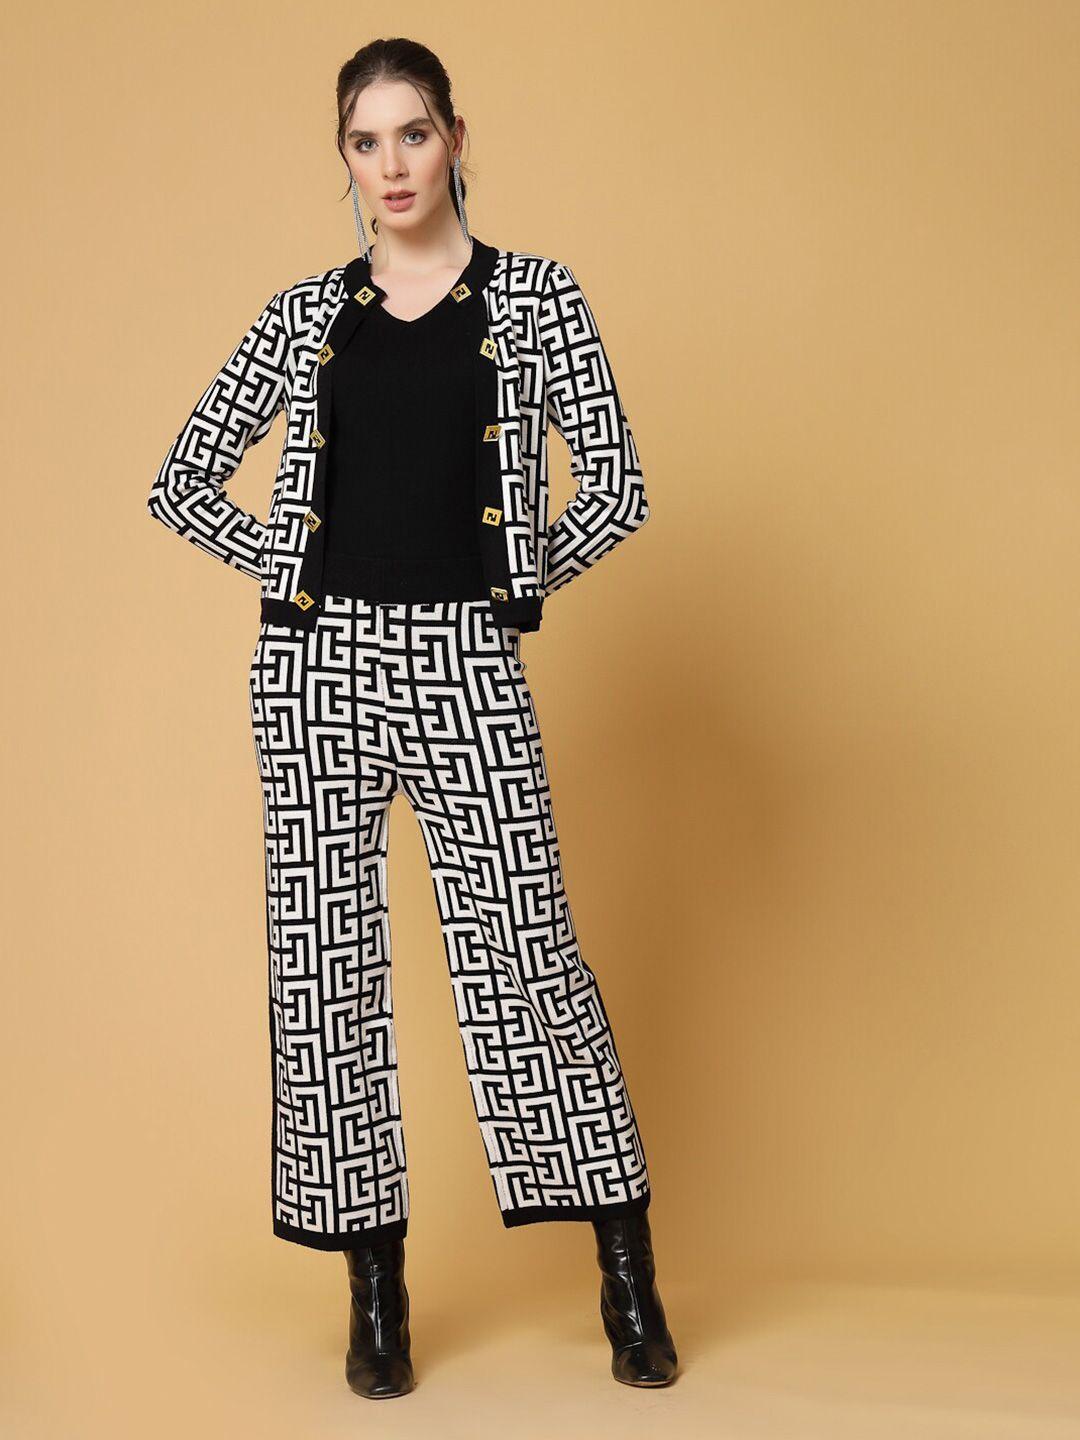 mafadeny winter wear top with printed trousers with jacket